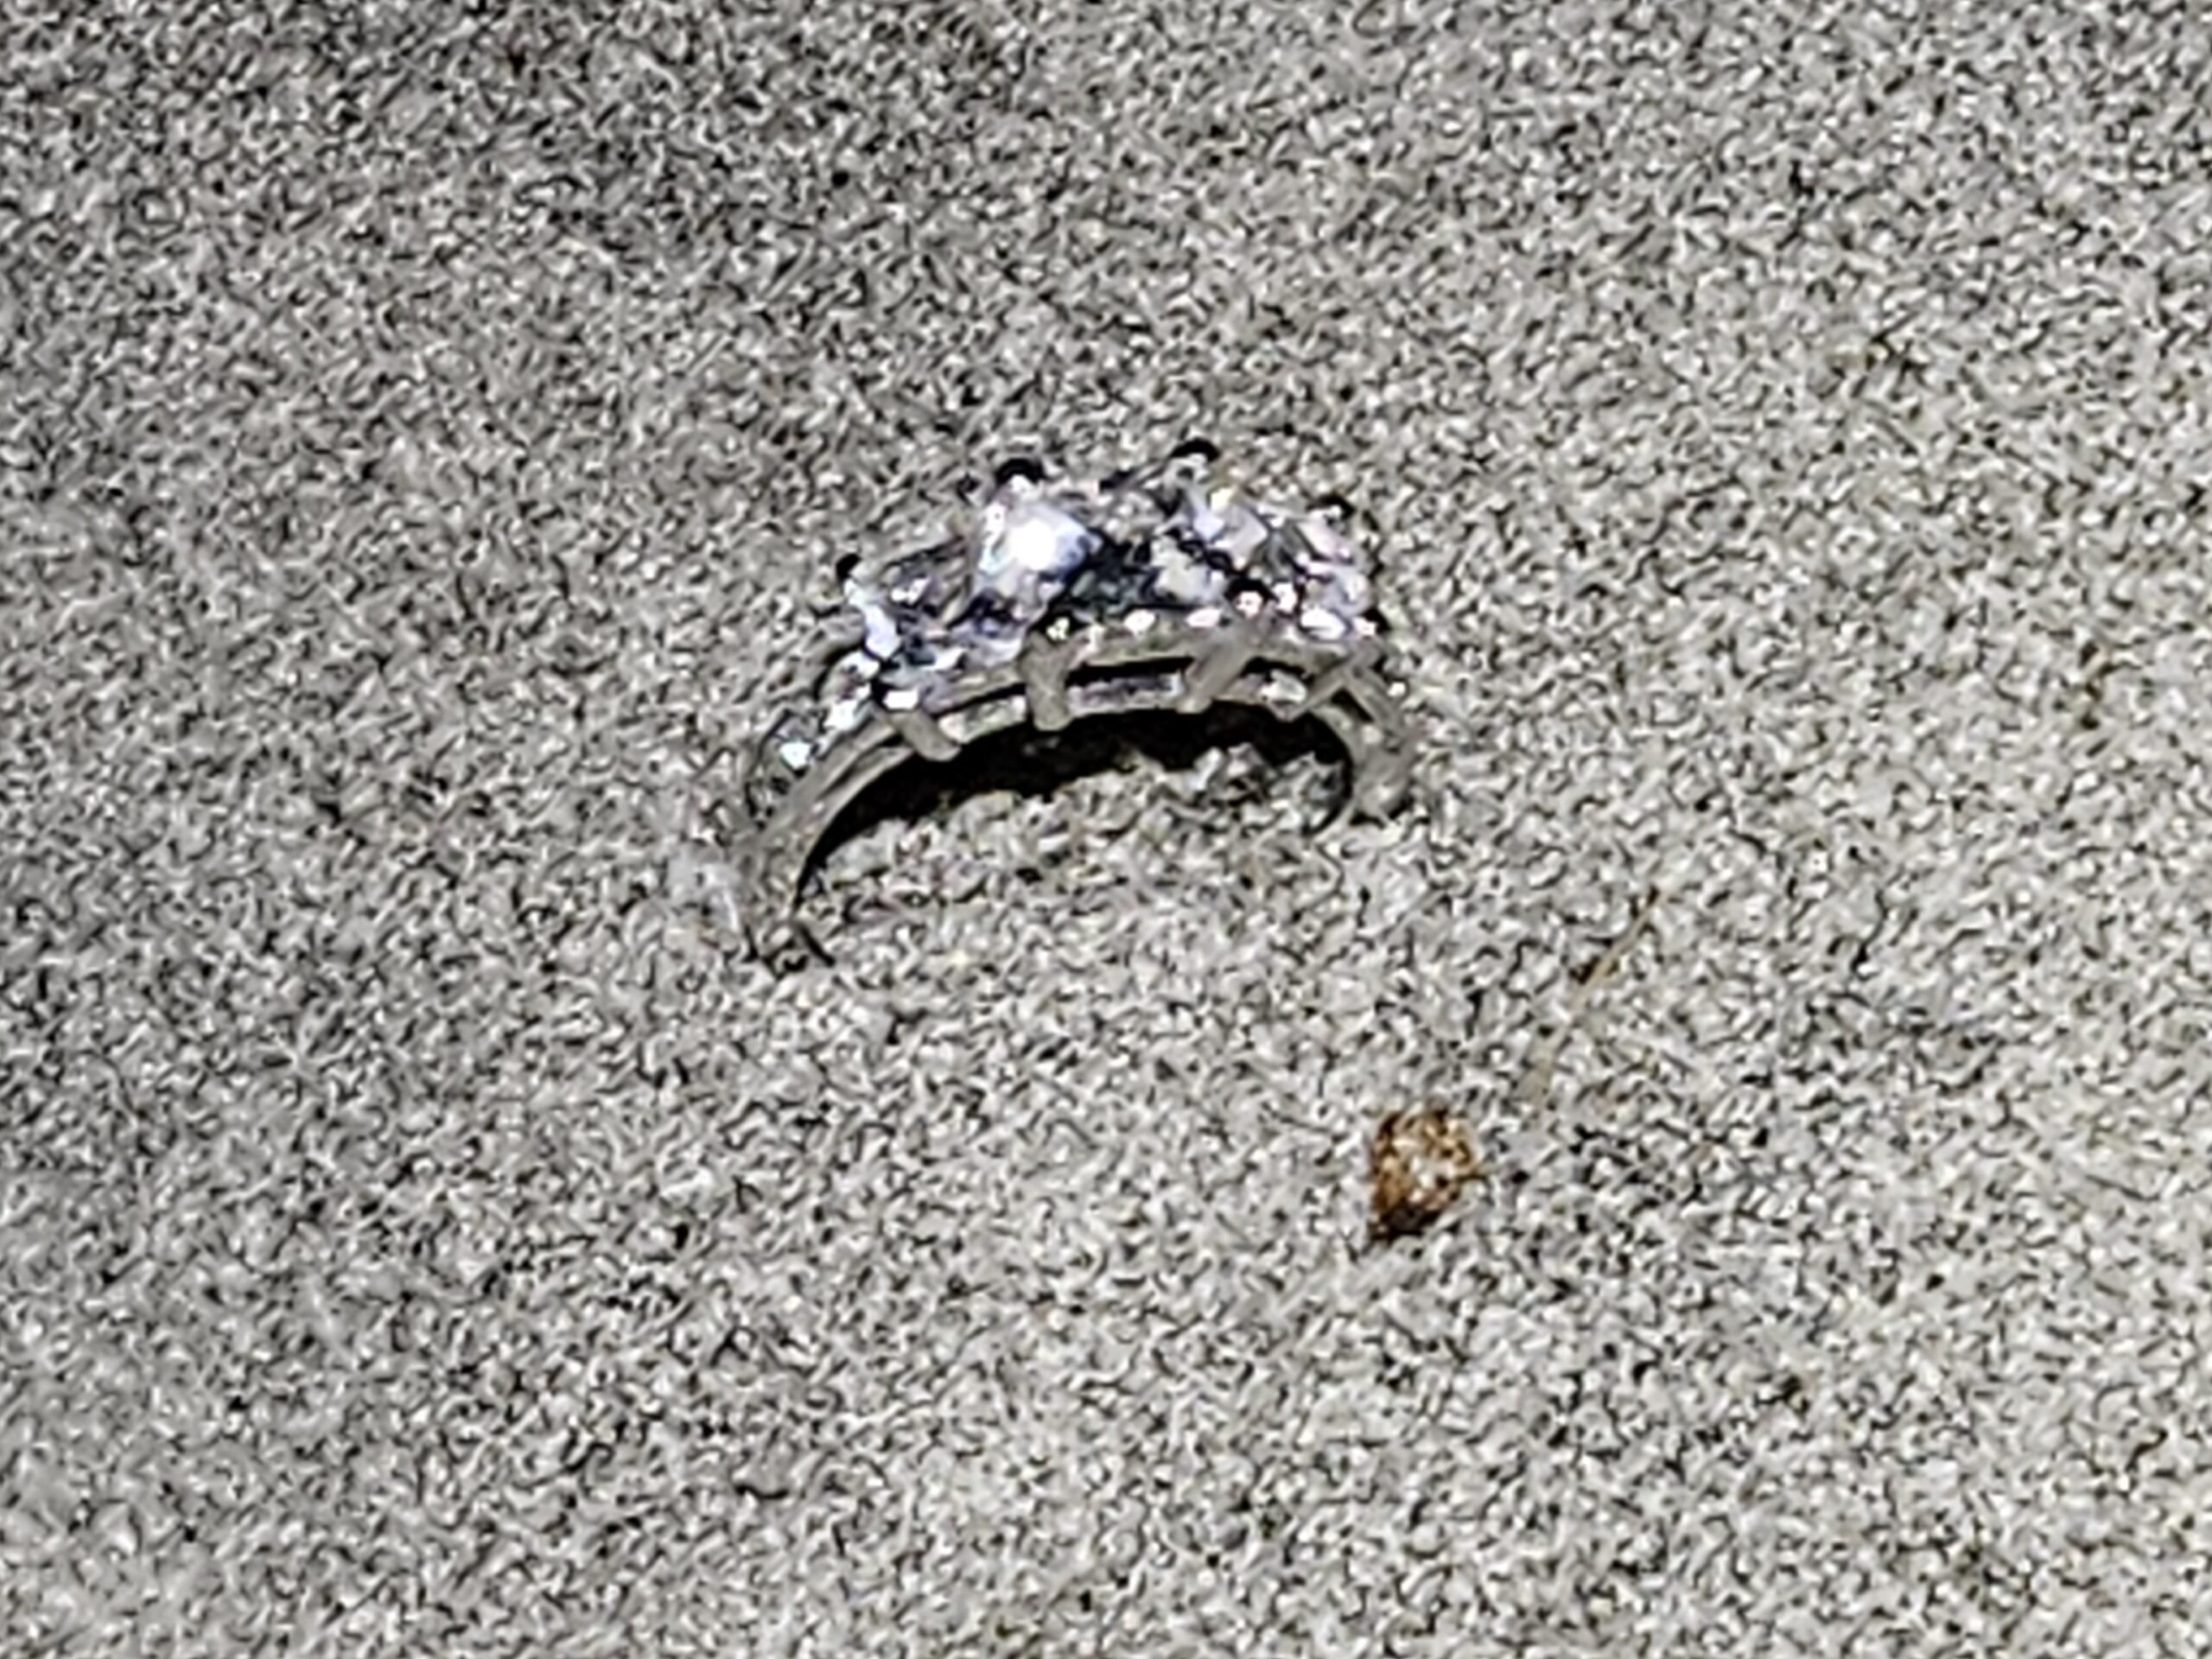 find a ring in the sand